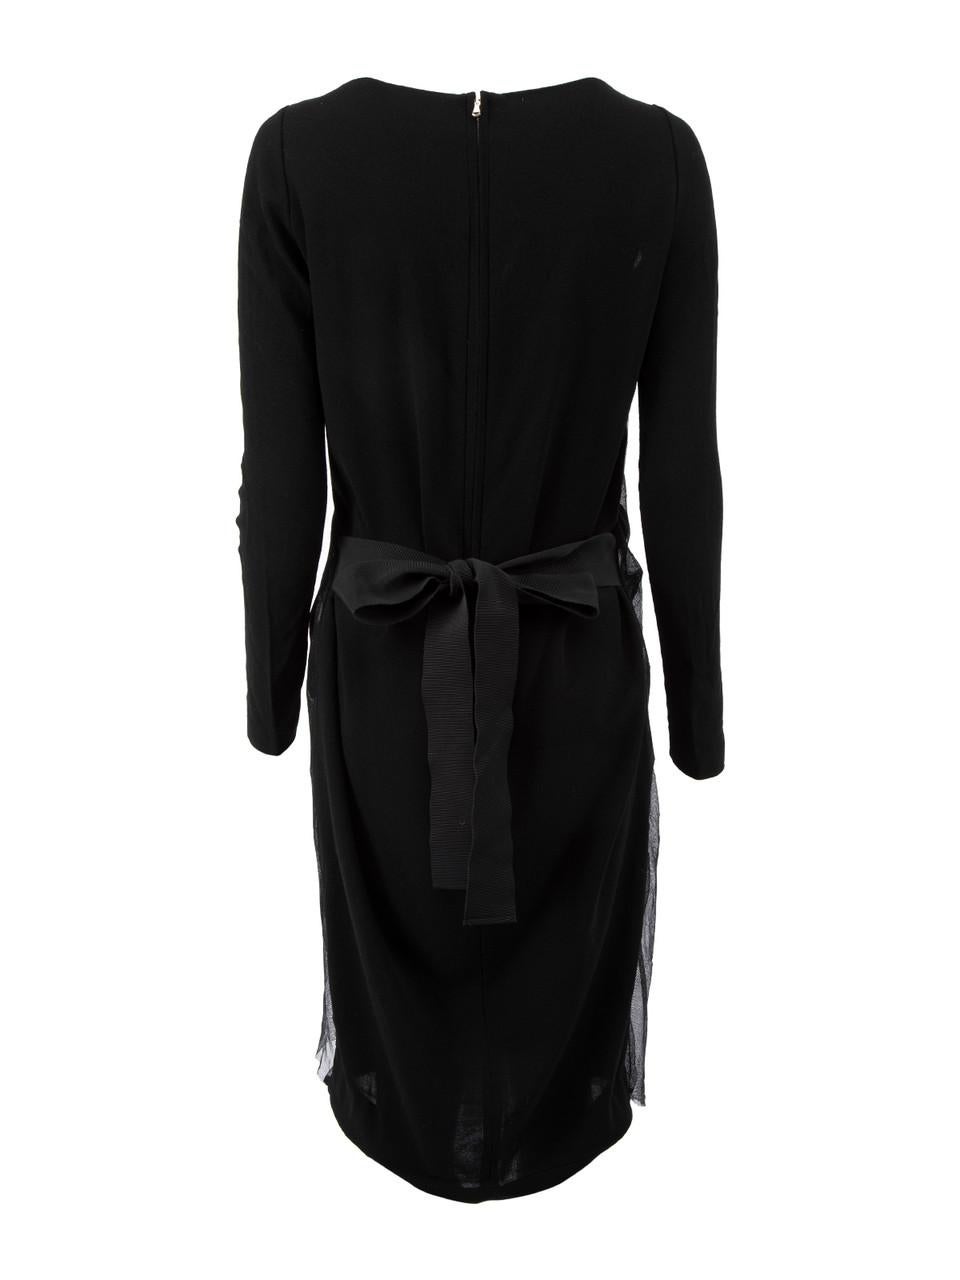 Black Peacock Long Sleeves Dress Size L In Good Condition For Sale In London, GB